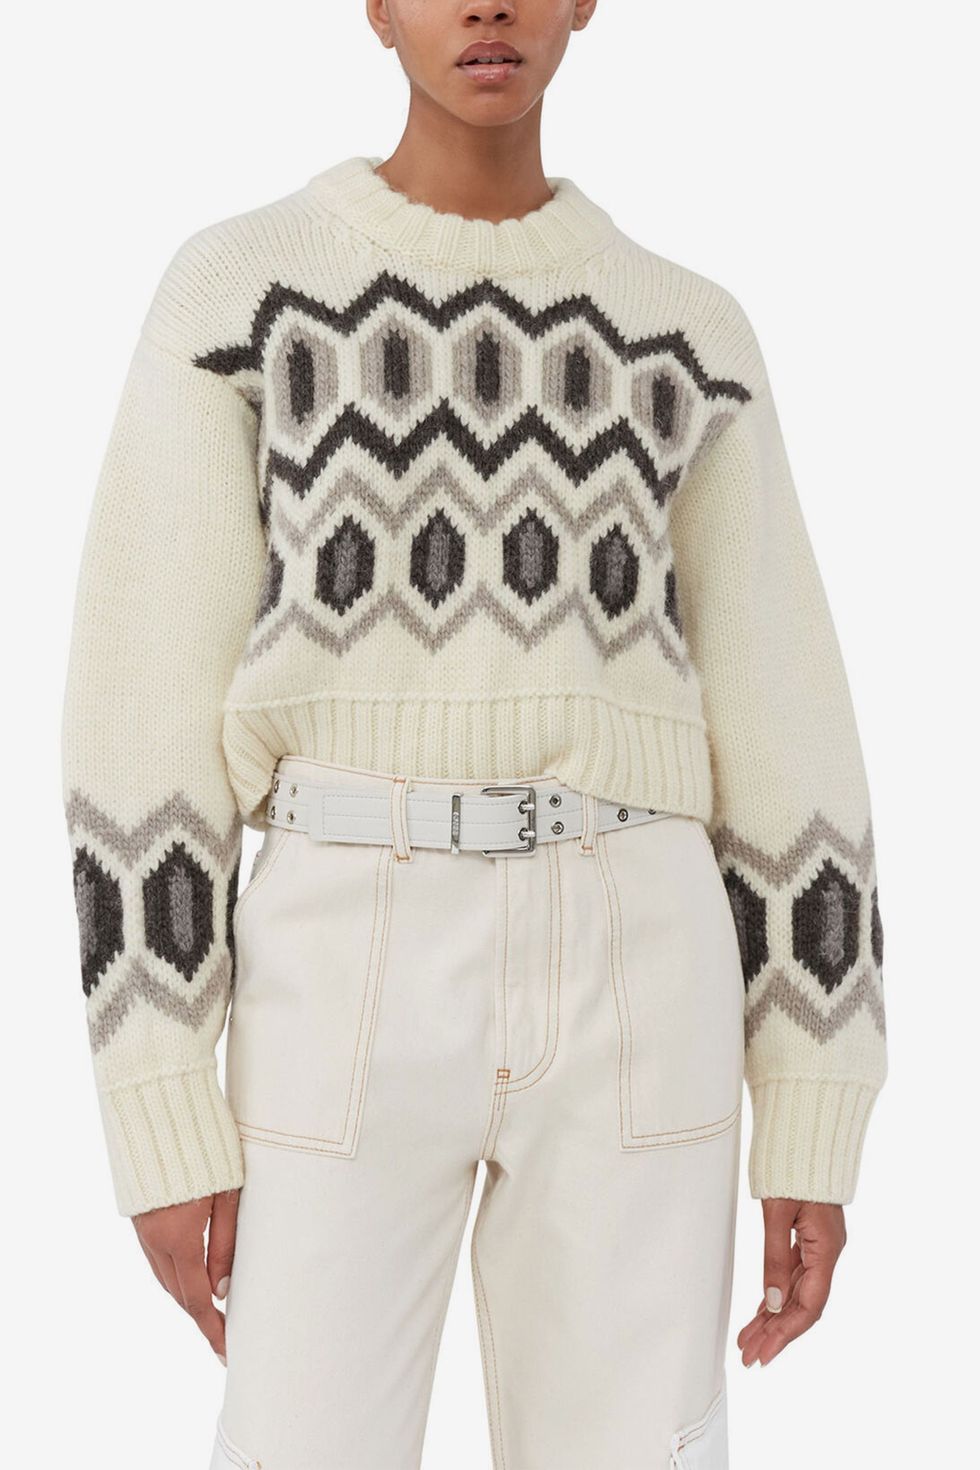 10 Comfy and Cozy Sweaters you need in your Wardrobe